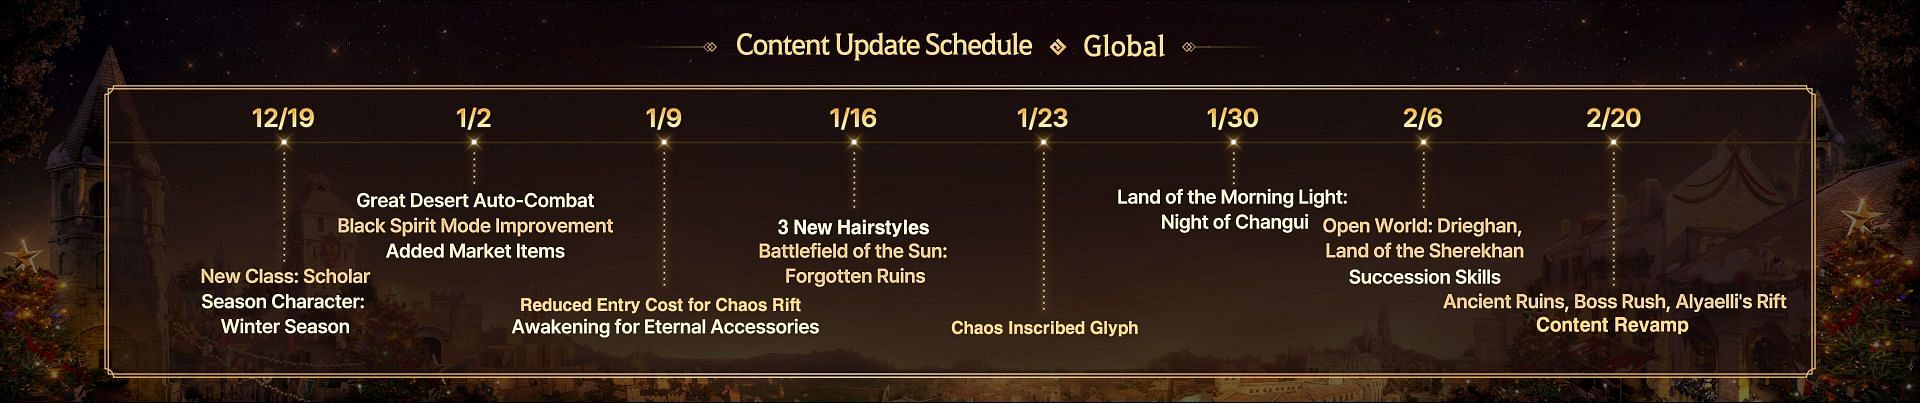 Content roadmap for Black Desert Mobile as revealed in Calpheon Ball (Image via Pearl Abyss)